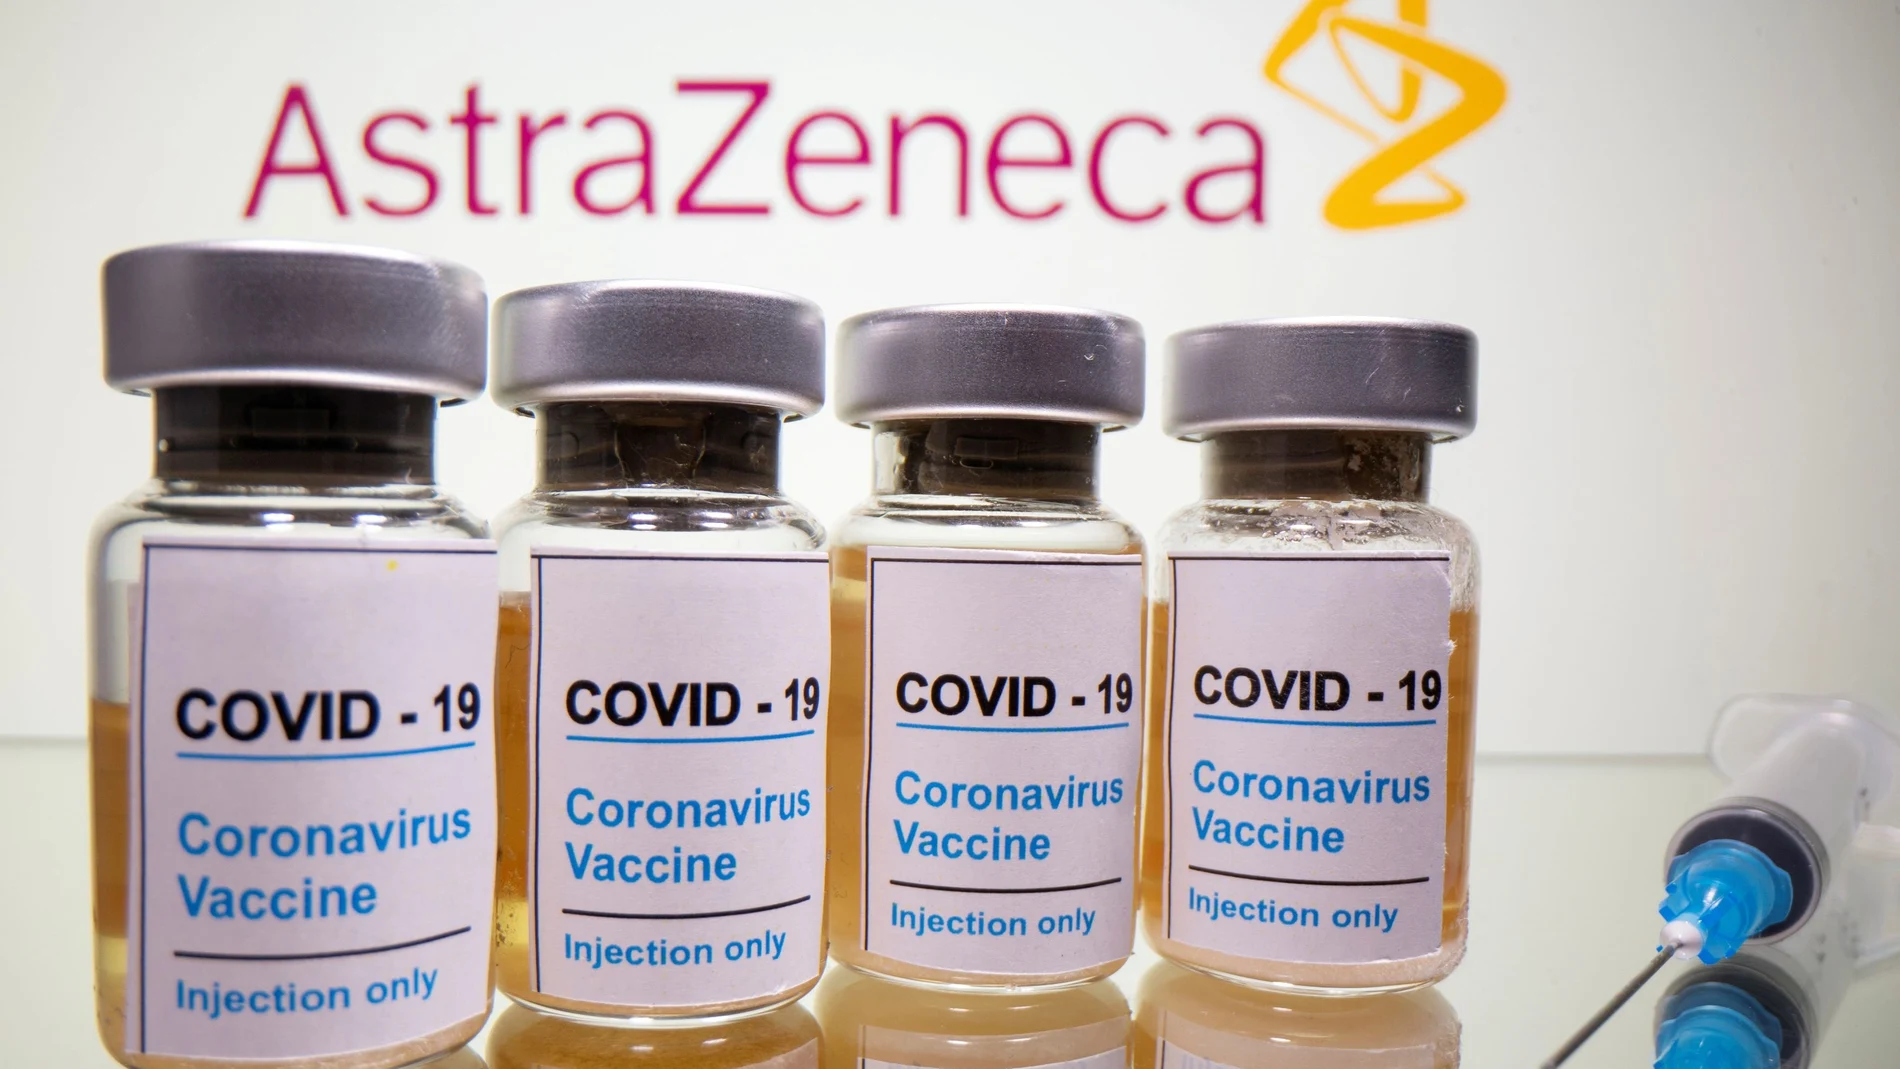 Vials with a sticker reading, "COVID-19 / Coronavirus vaccine / Injection only" and a medical syringe are seen in front of a displayed AstraZeneca logo in this illustration taken October 31, 2020. REUTERS/Dado Ruvic/Illustration